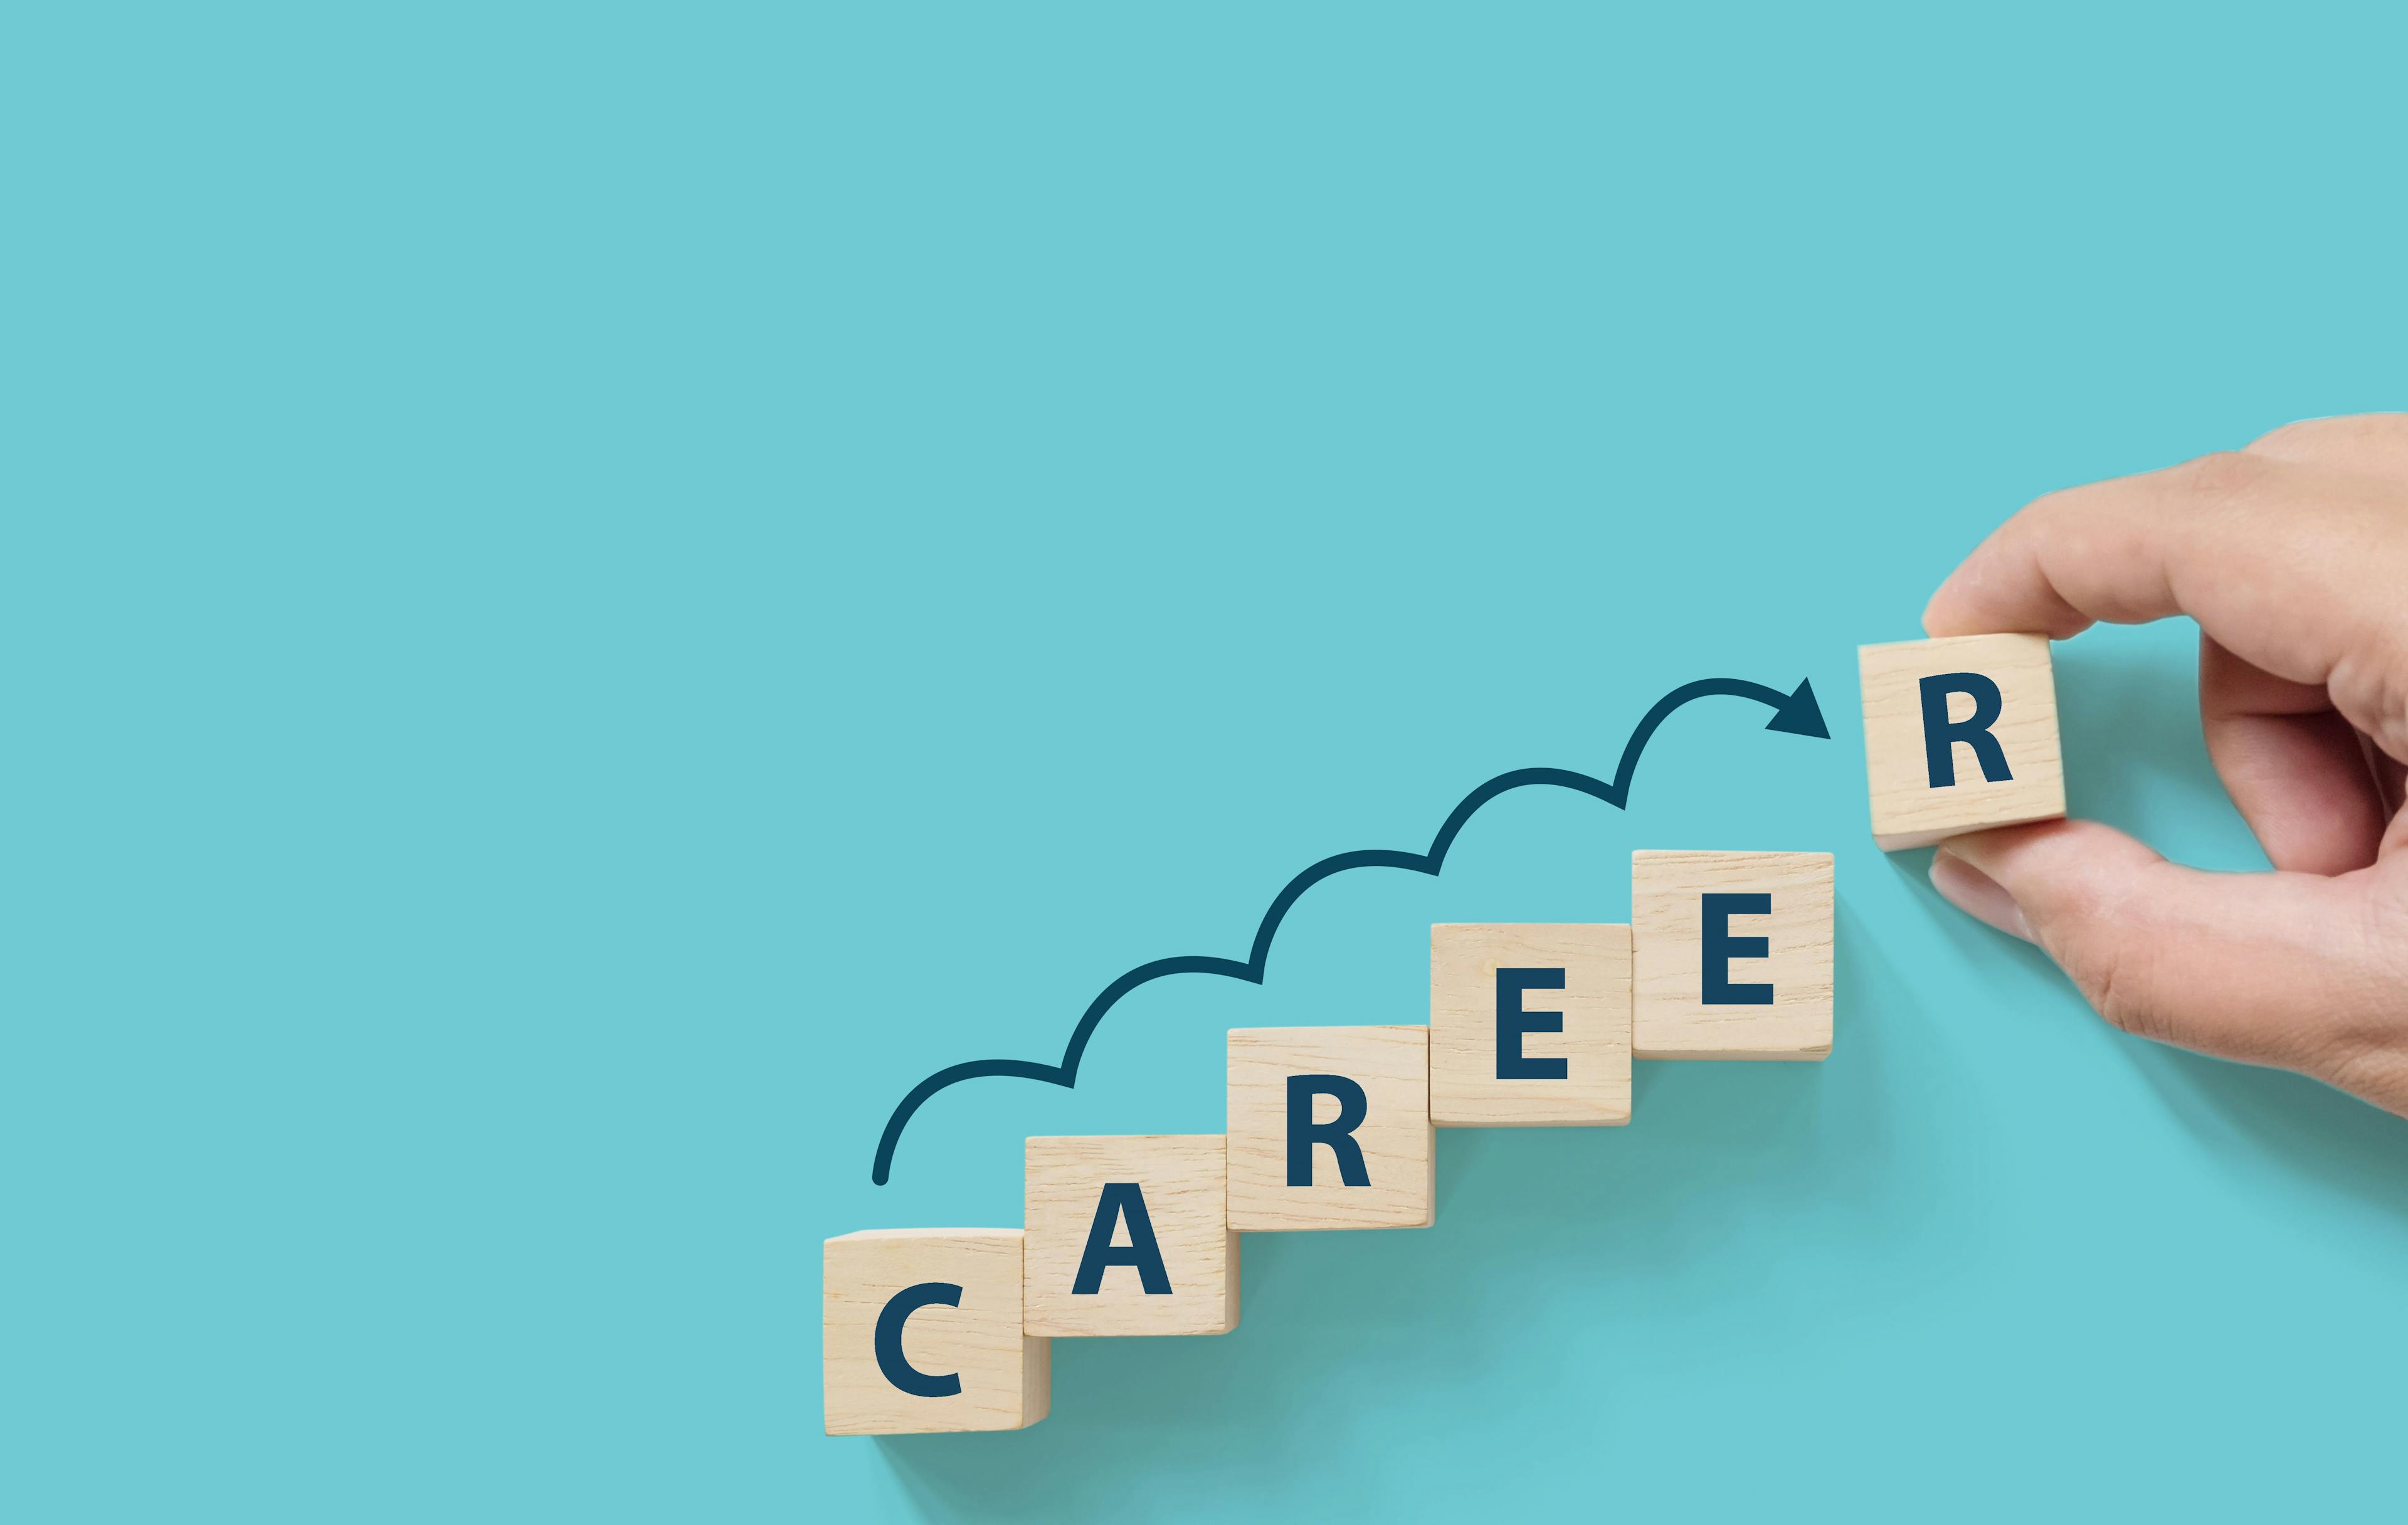 Expanded Technician Roles Call for Defined Career Ladders